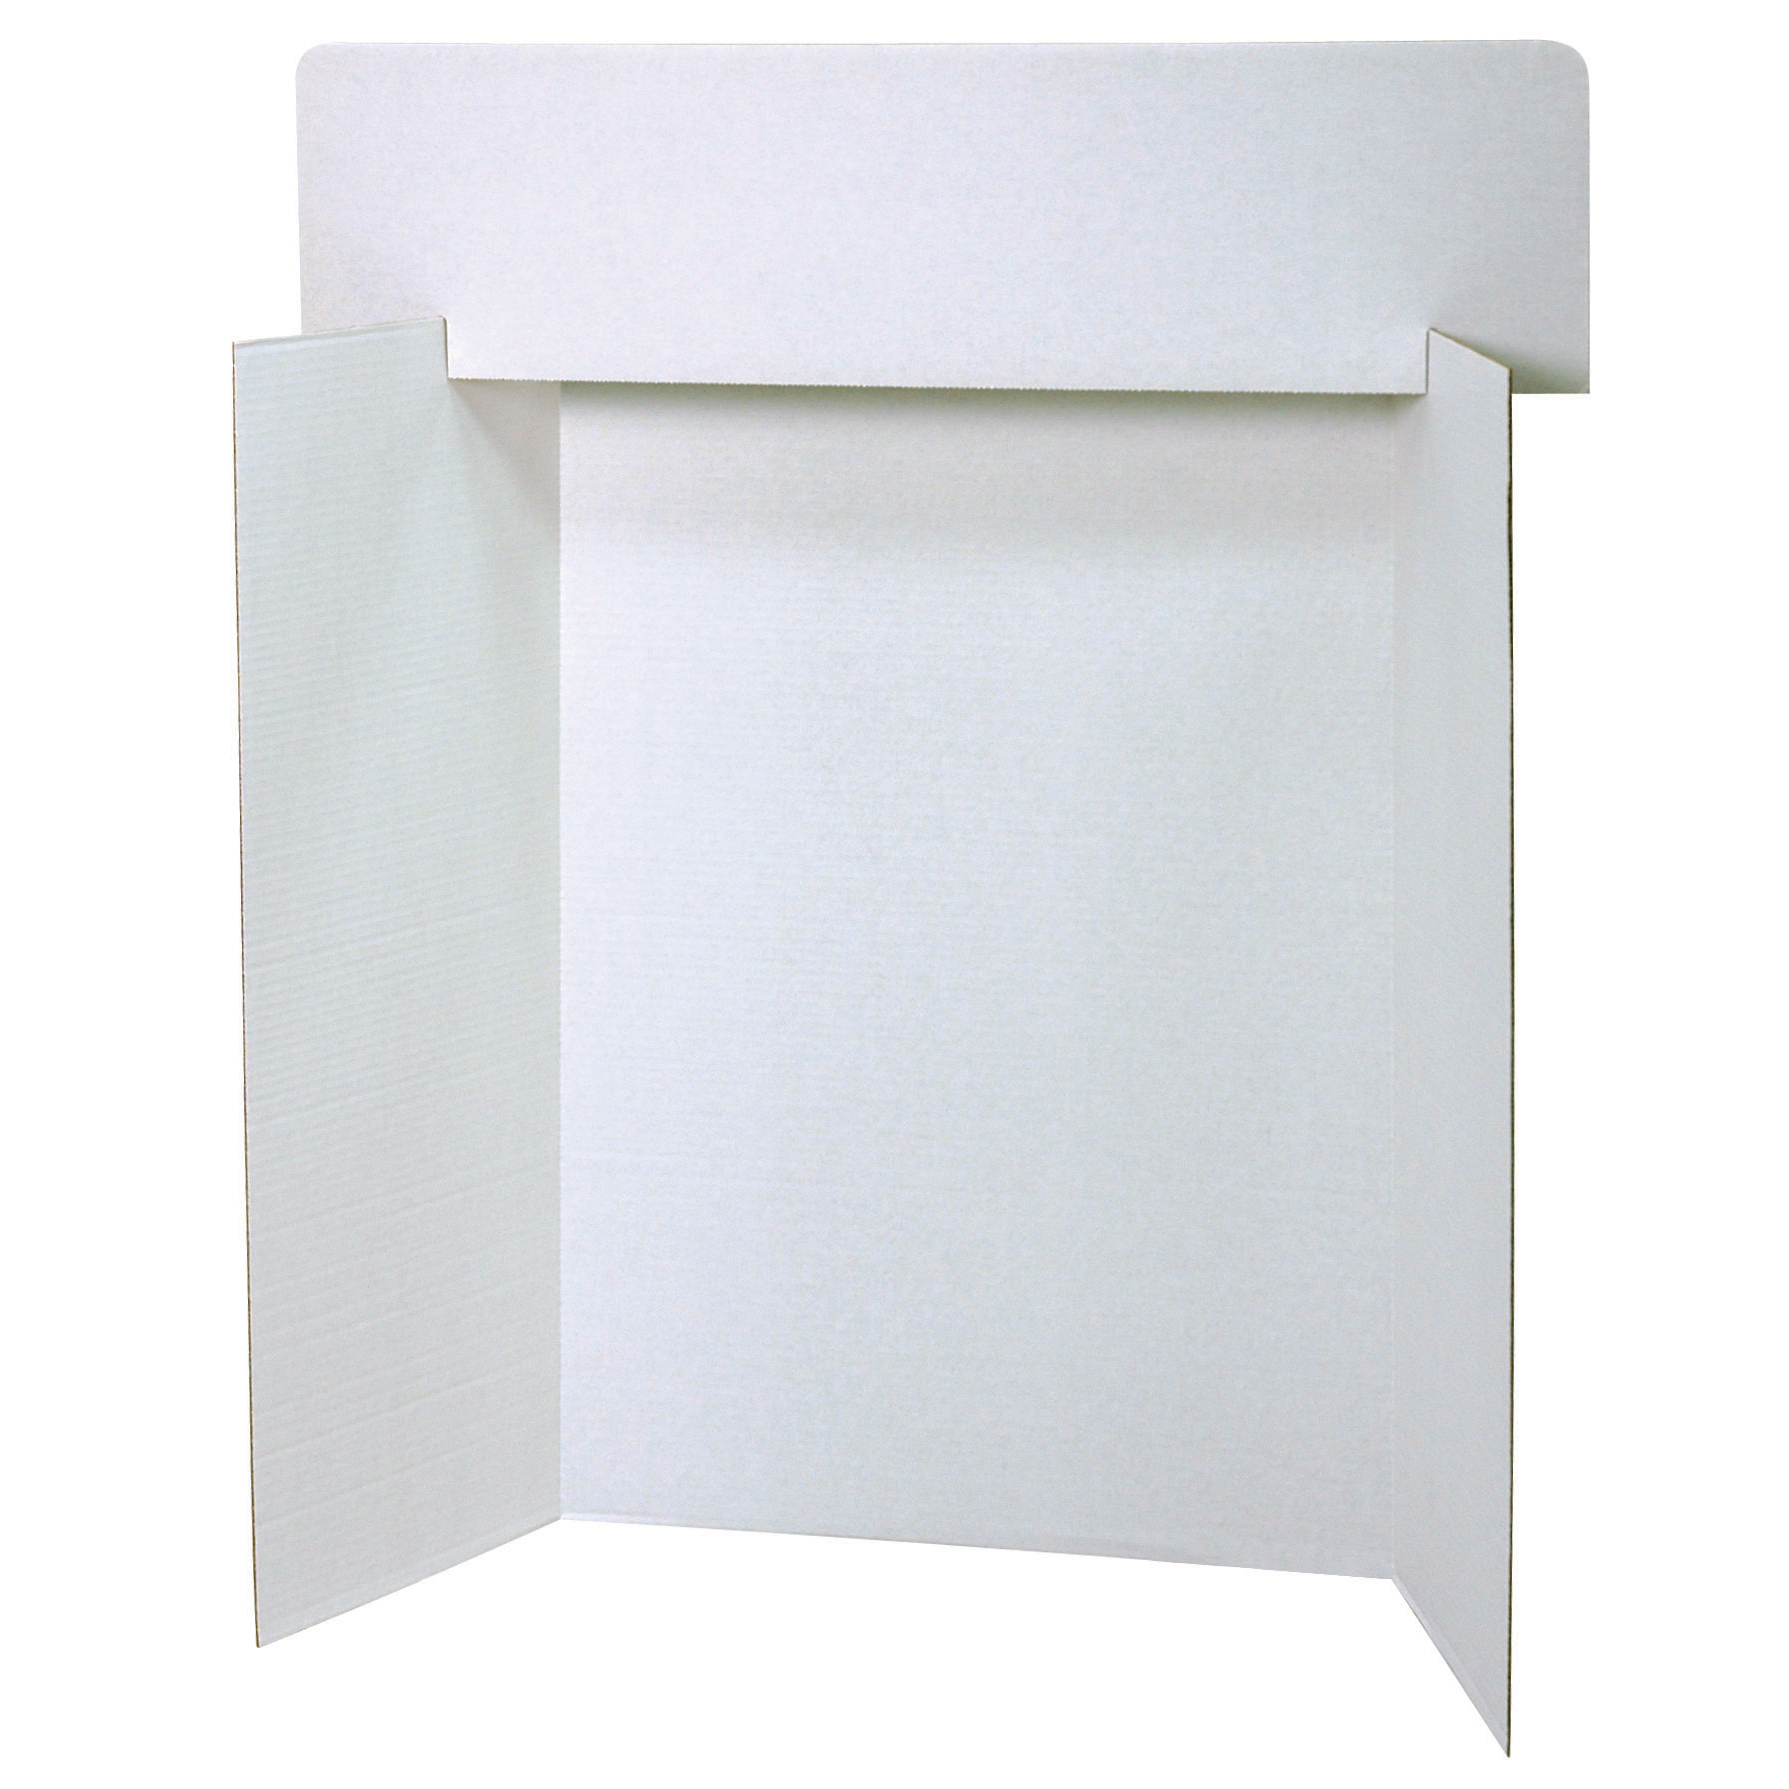 Pacon Classroom Construction Paper Storage, 10 Slots, White